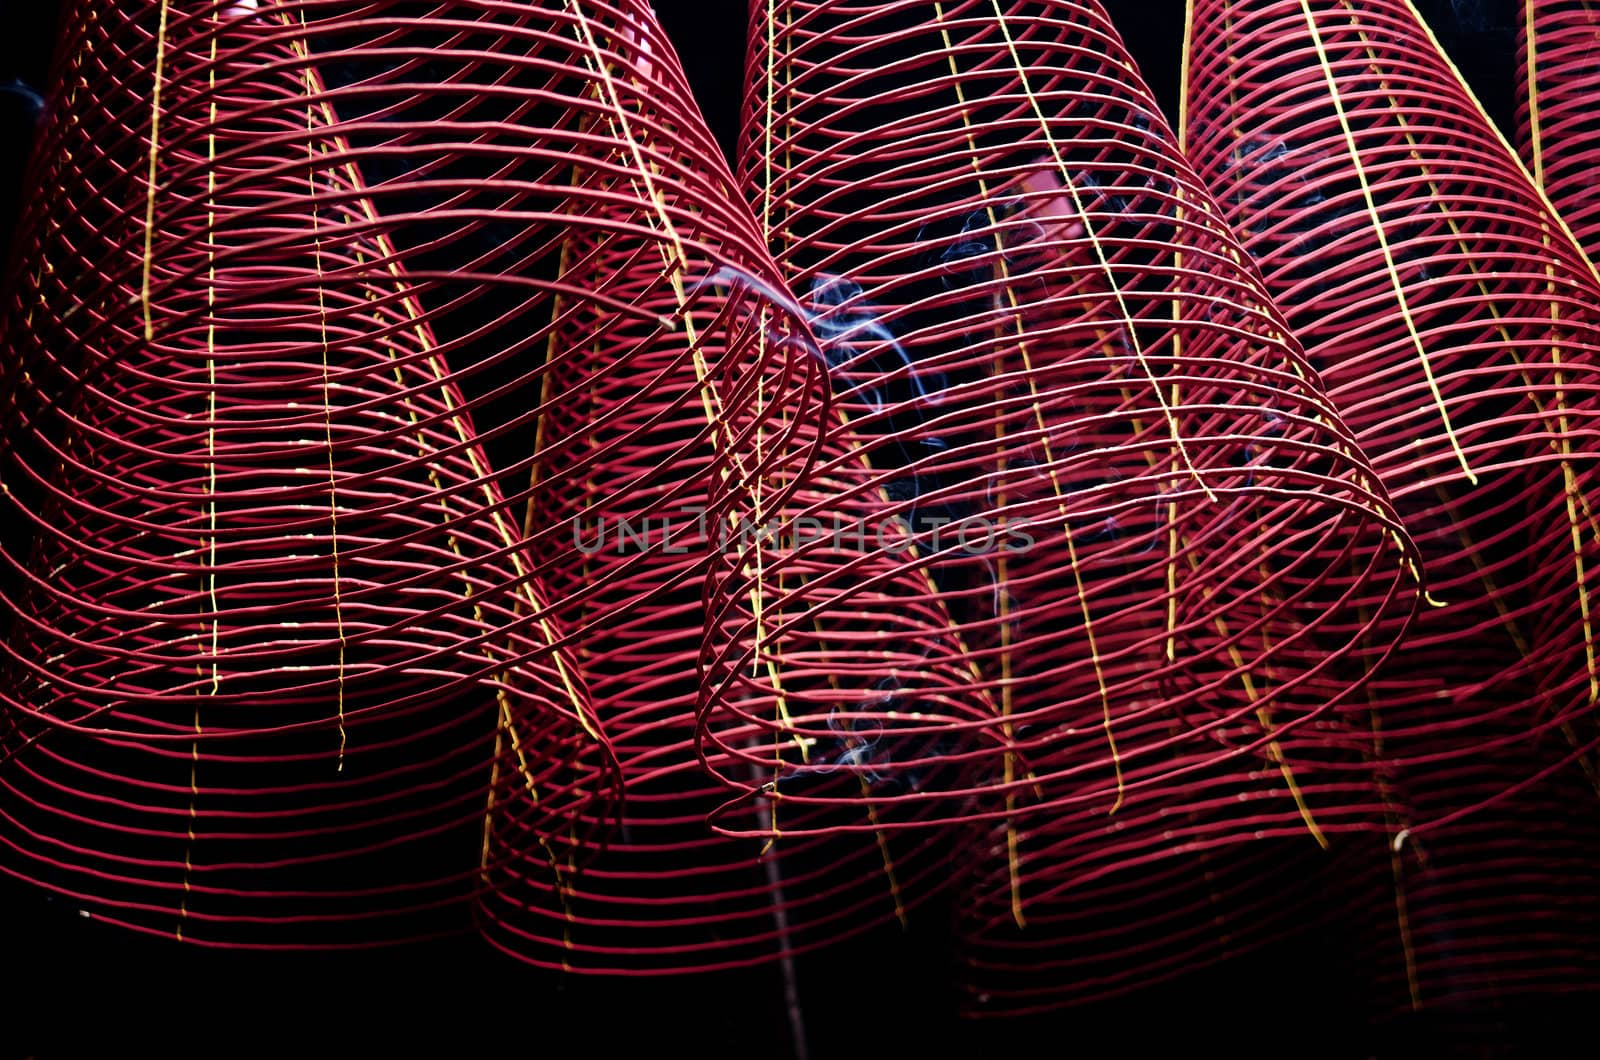 incense coils in chinese temple ho chi minh saigon vietnam